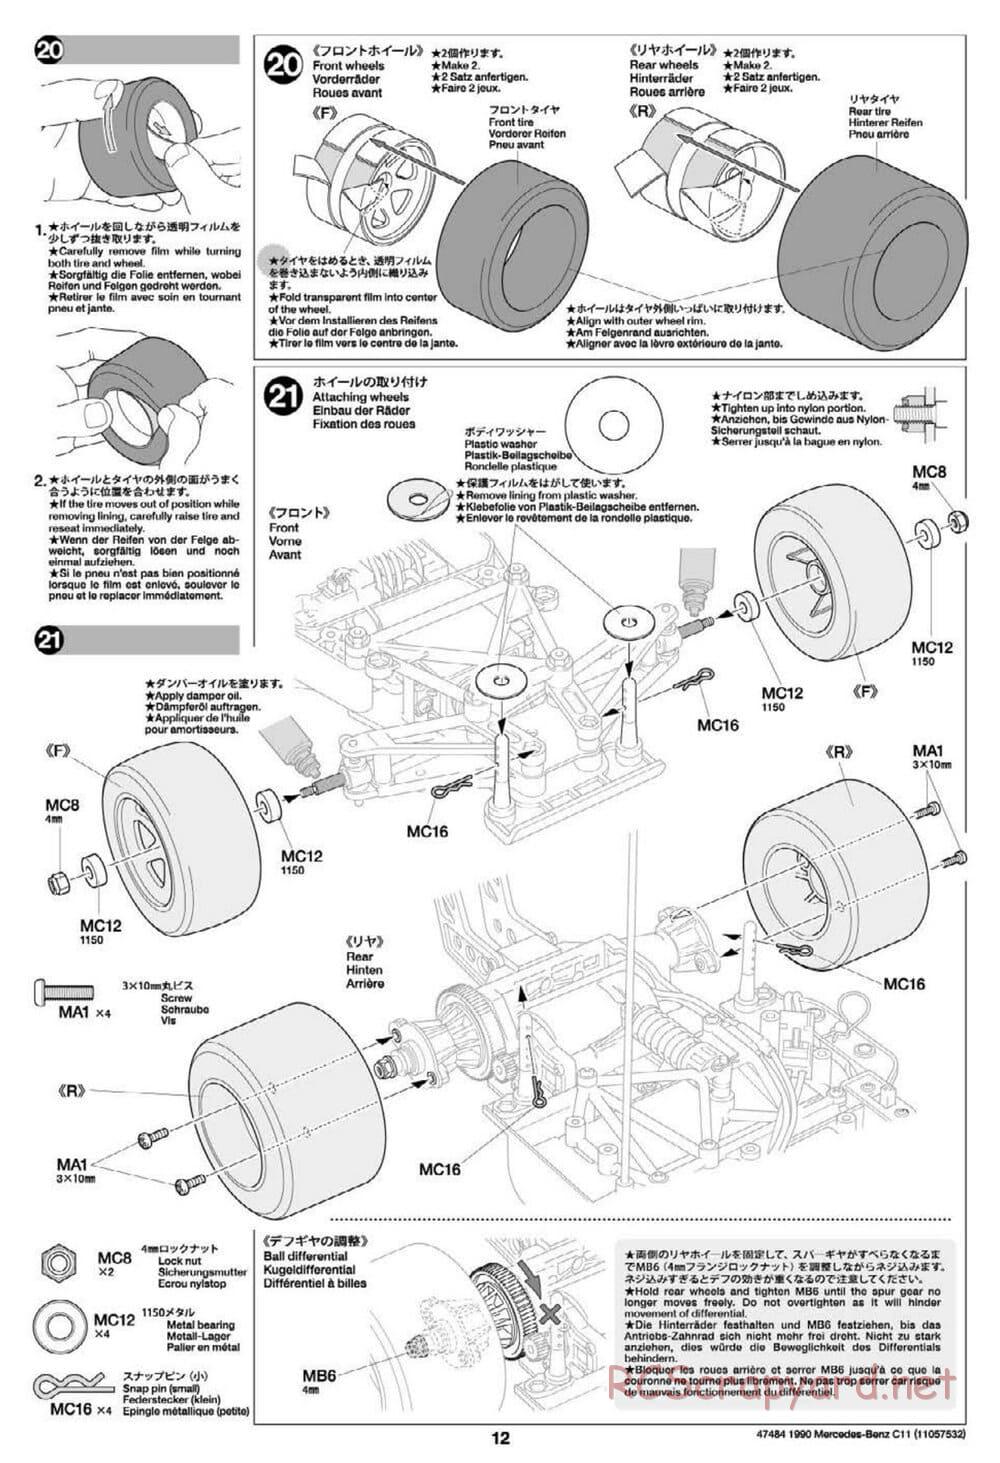 Tamiya - 1990 Mercedes-Benz C11 - Group-C Chassis - Manual - Page 12